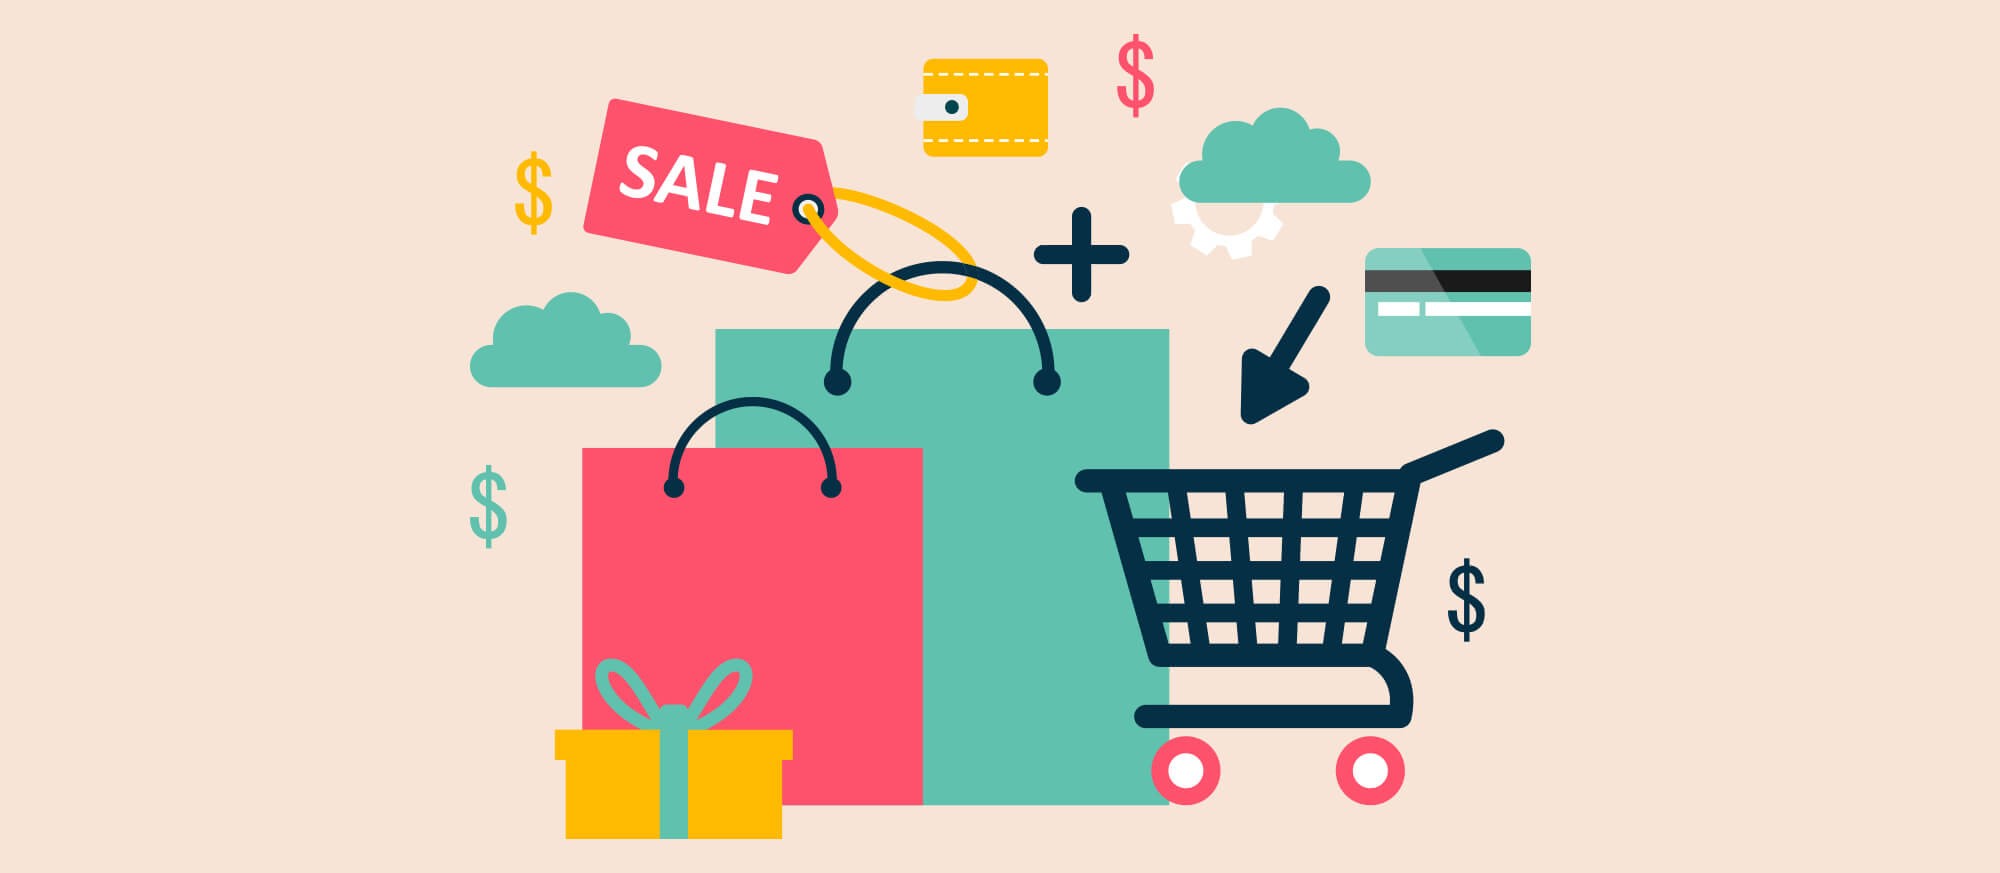 Why an online shopping cart is so important?